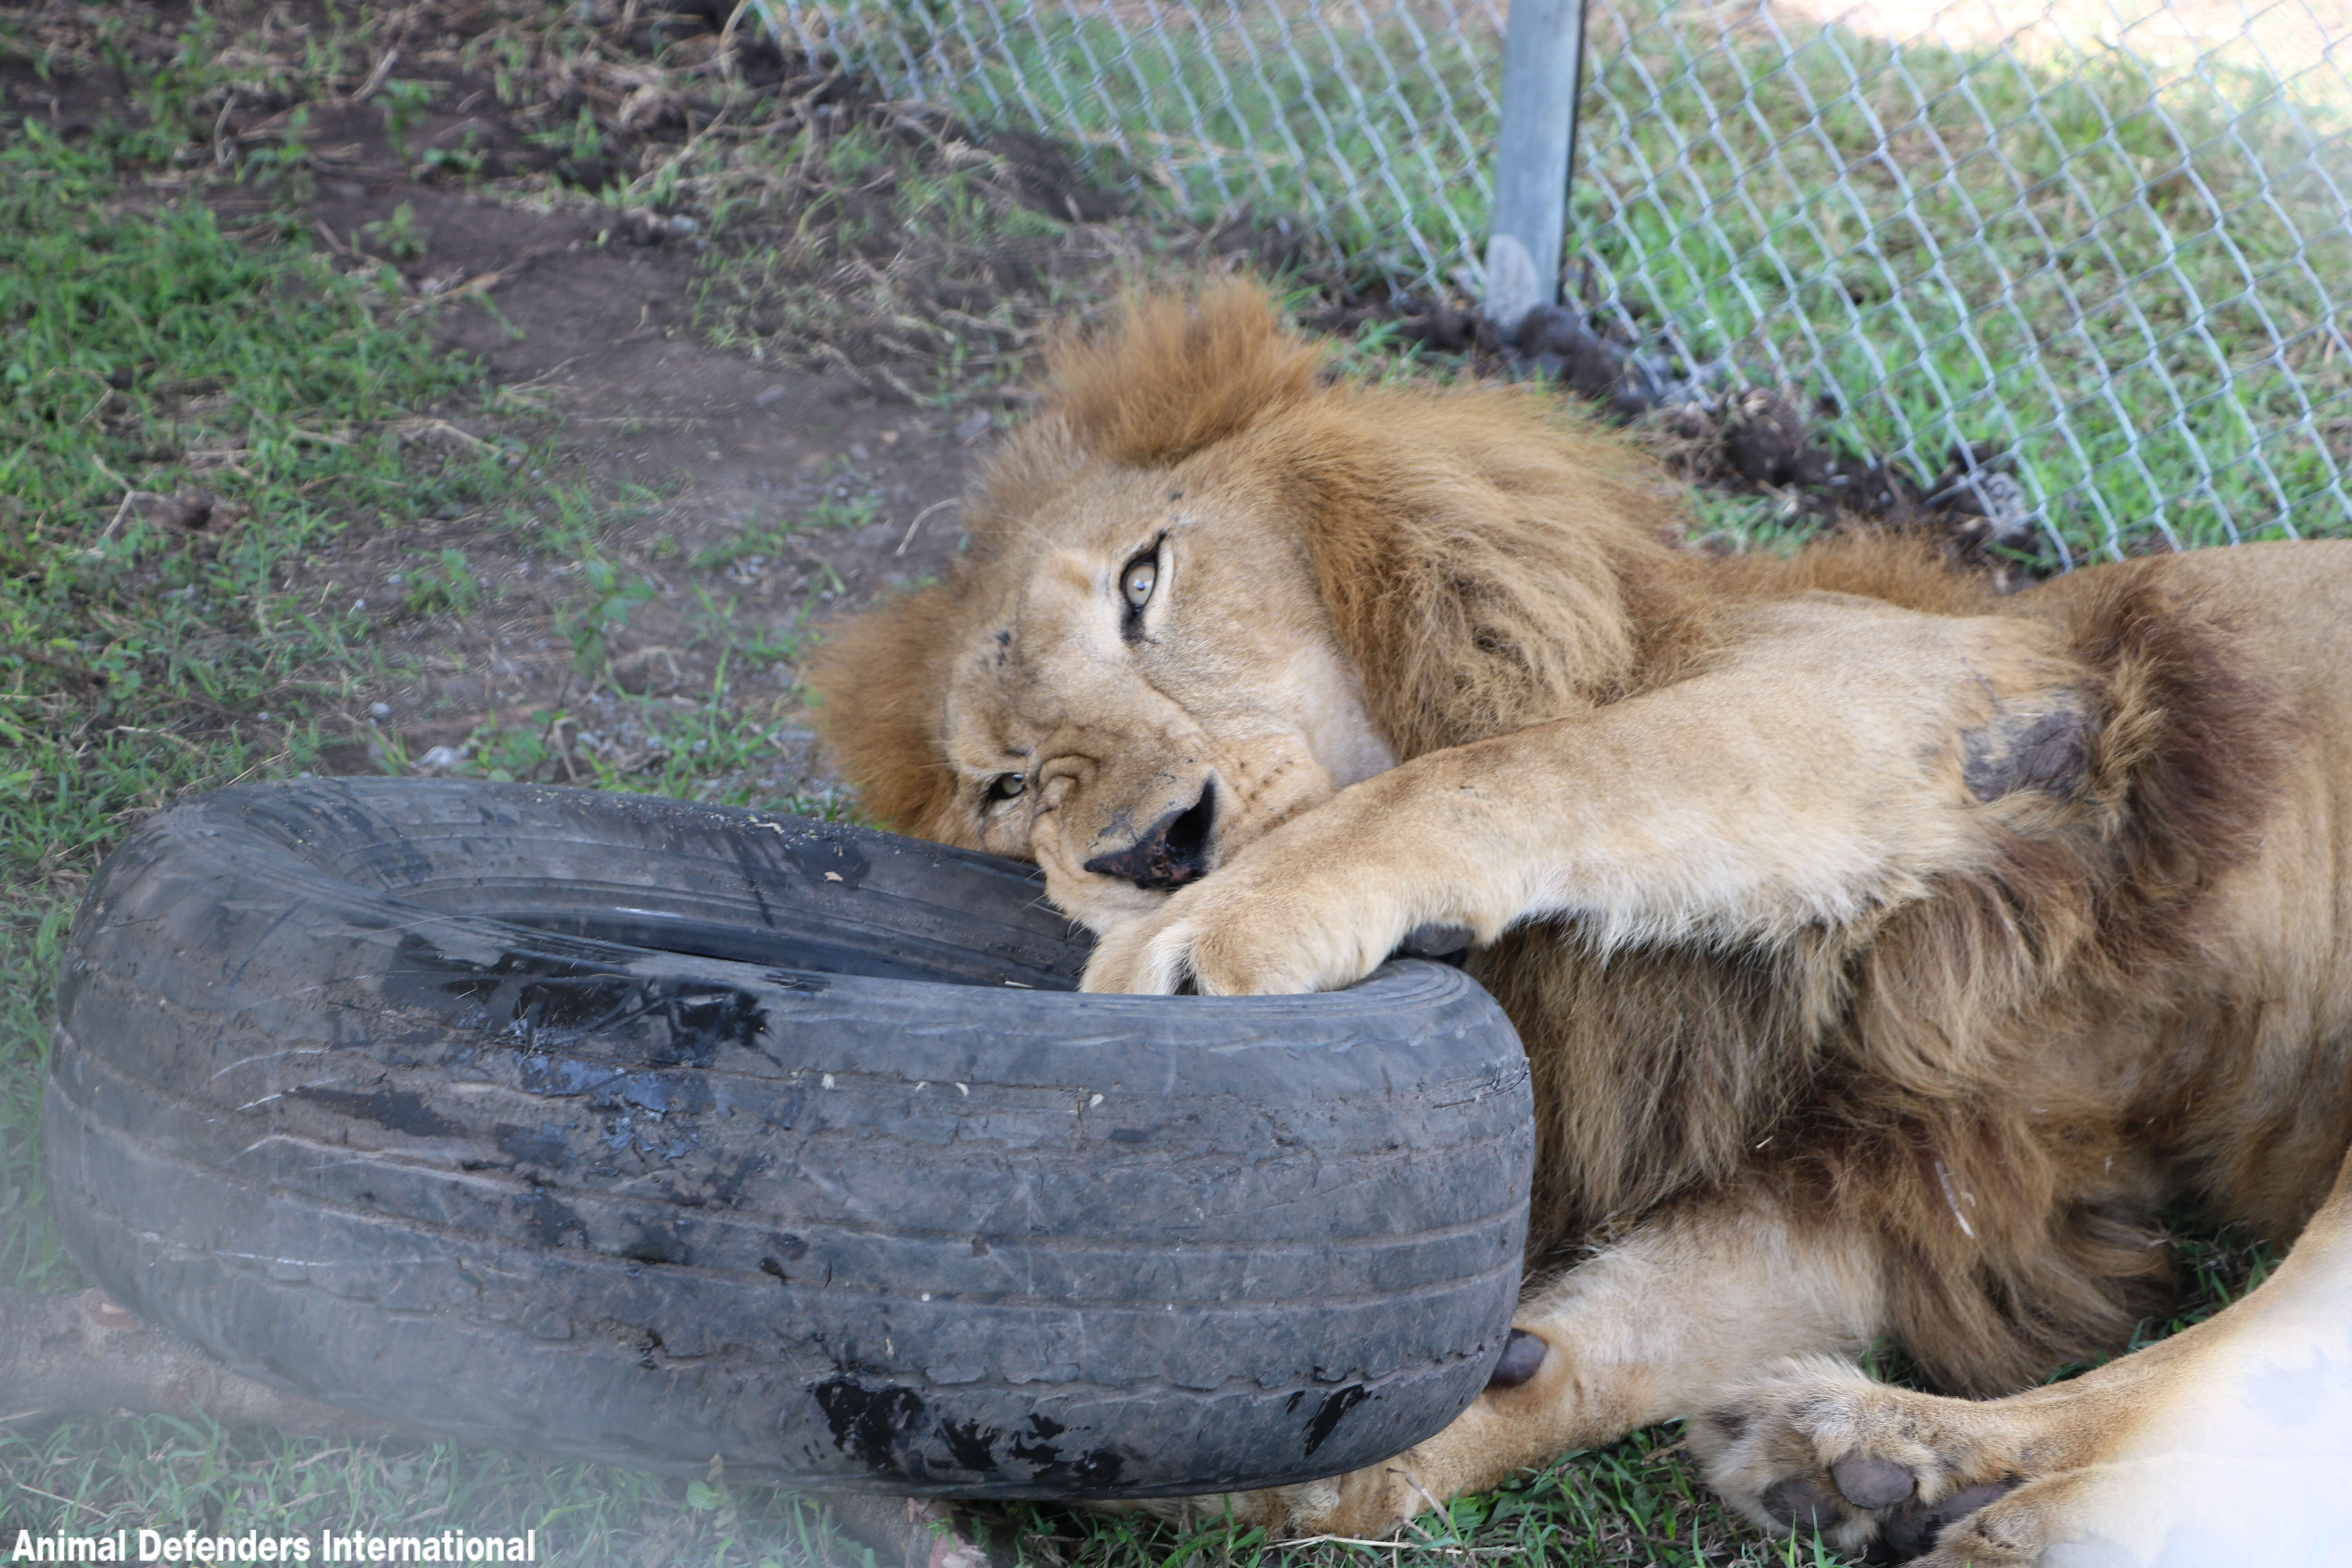 Rescued lion playing with tire in new enclosure